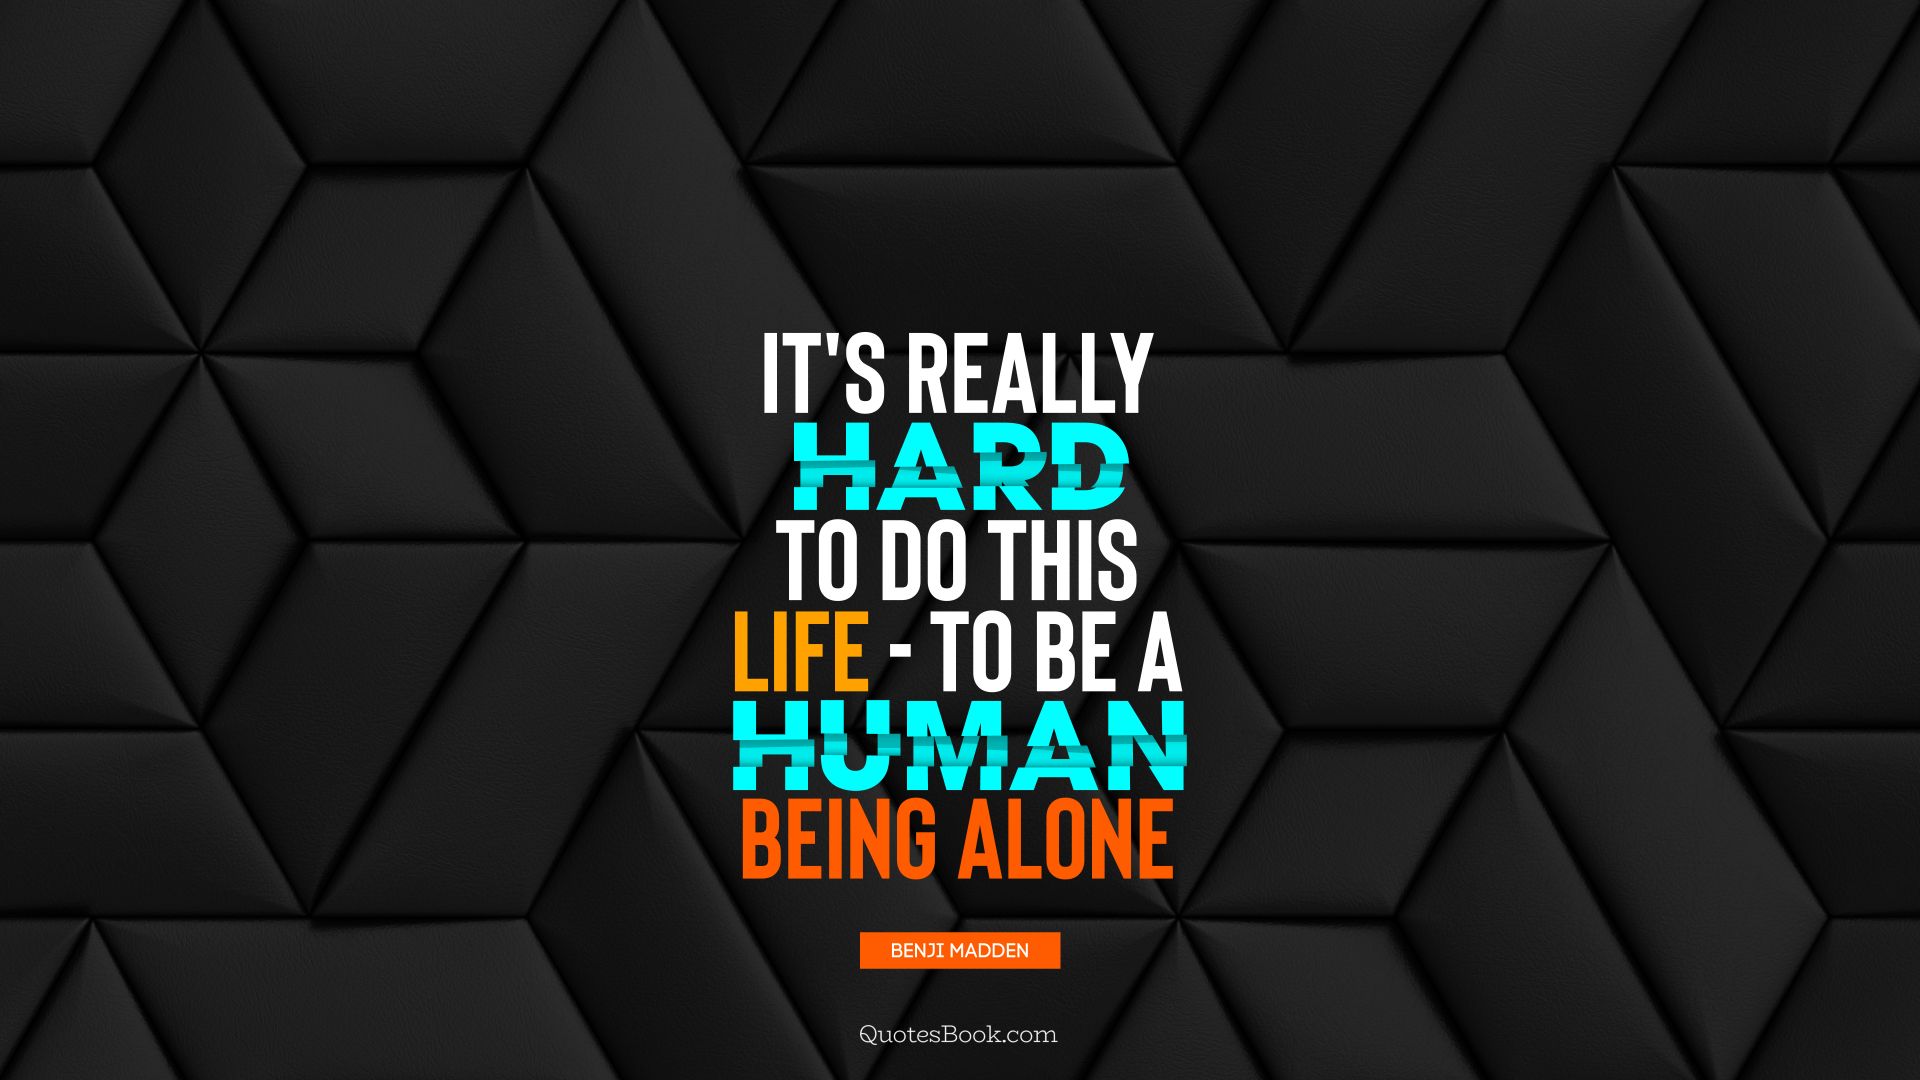 It's really hard to do this life - to be a human being alone. - Quote by Benji Madden